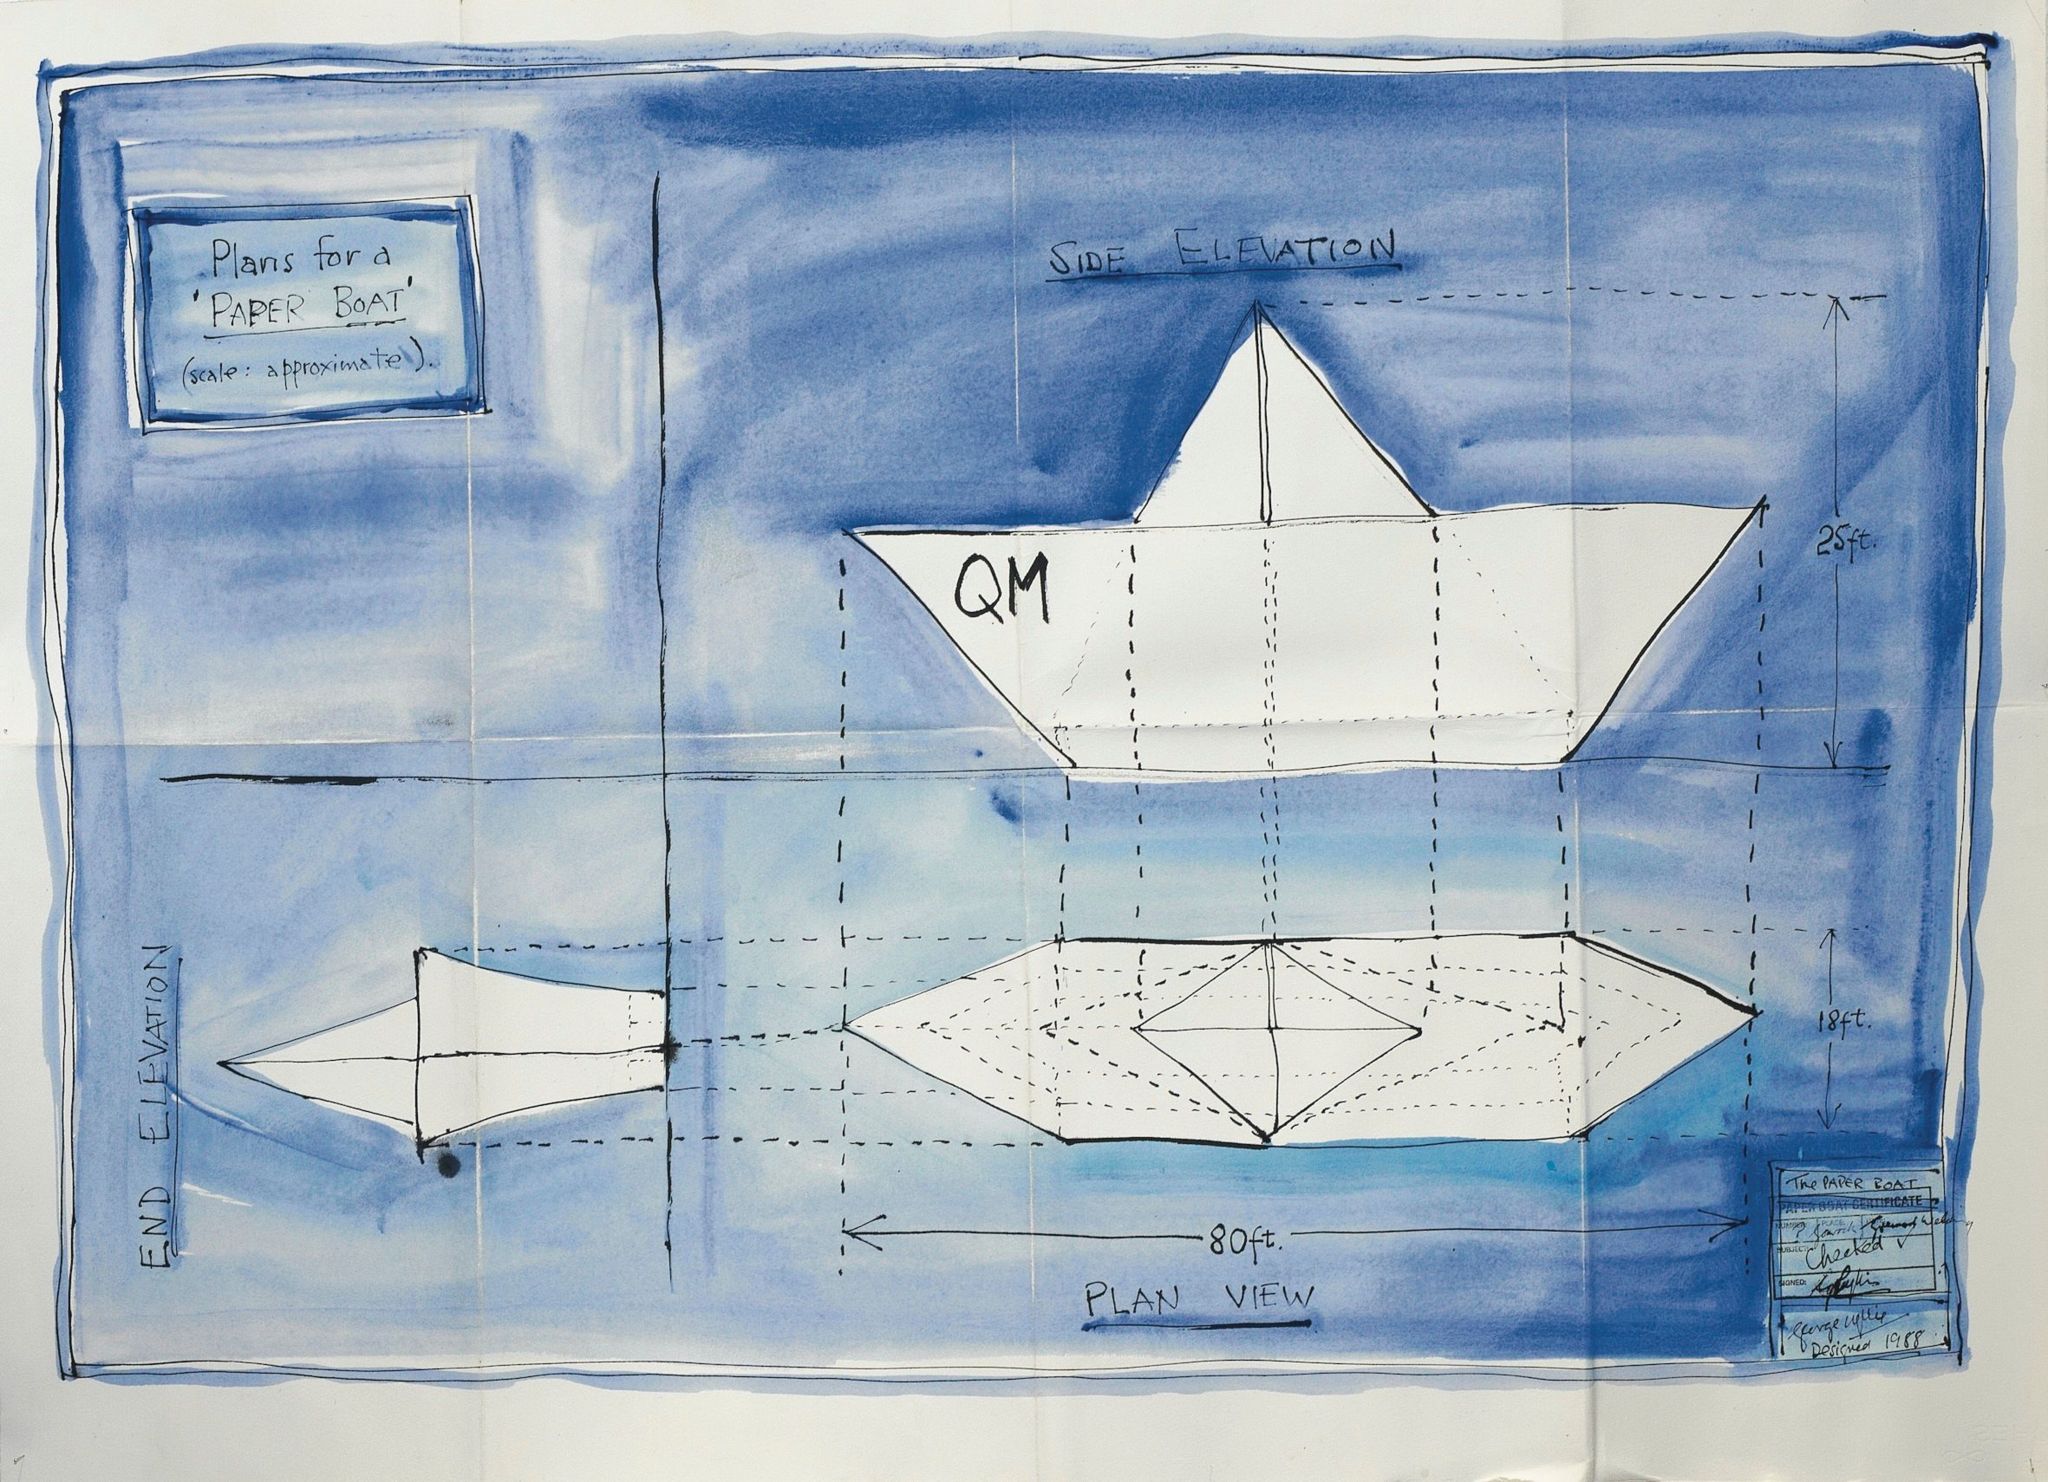 Watercolour sketches showing Paper Boat